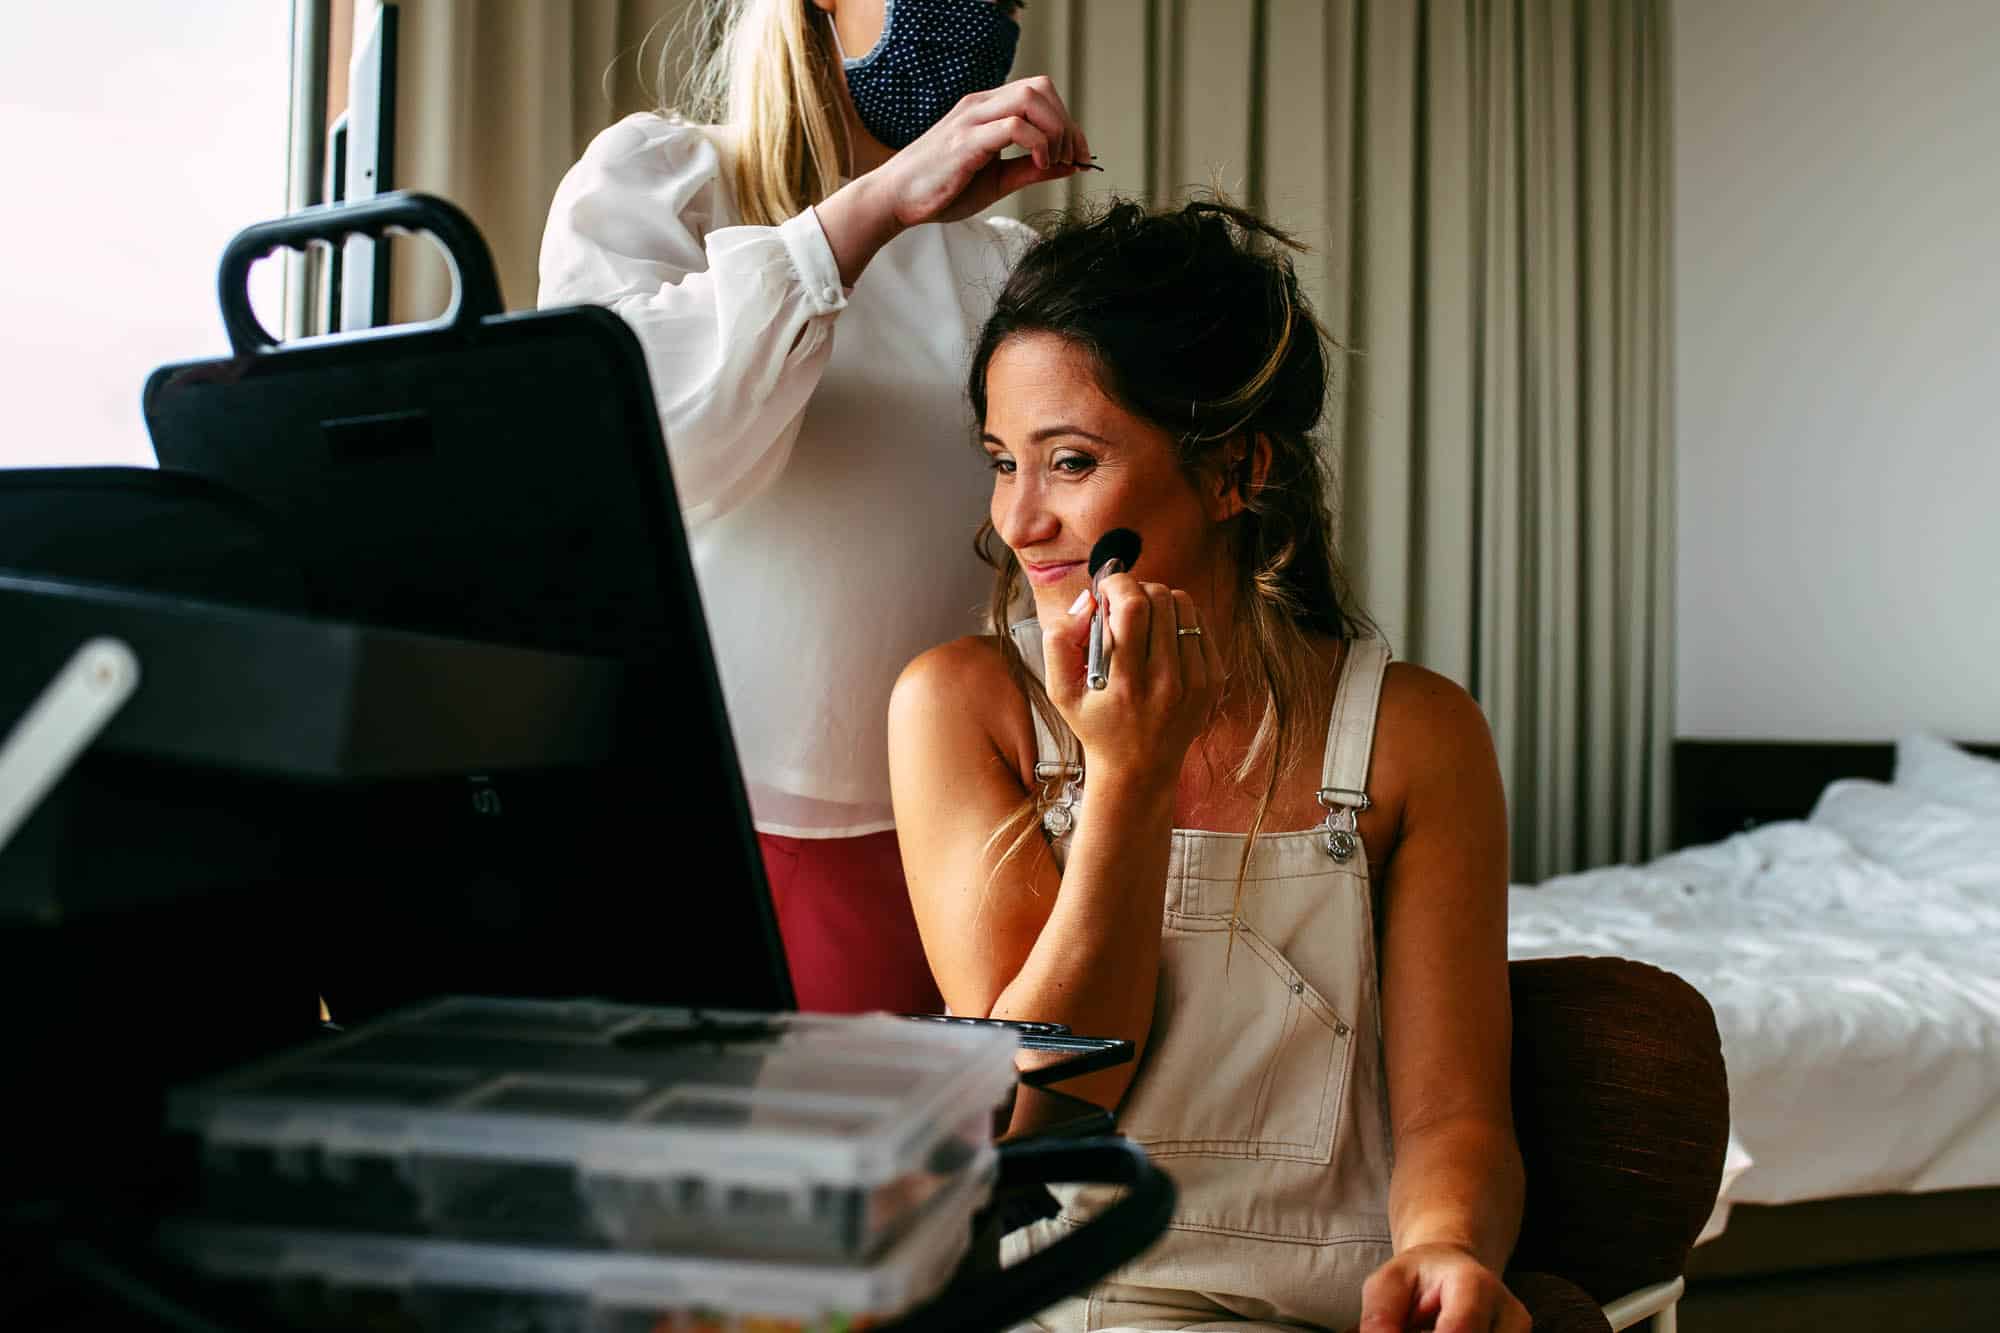 A woman has her bridal make-up done in a hotel room.